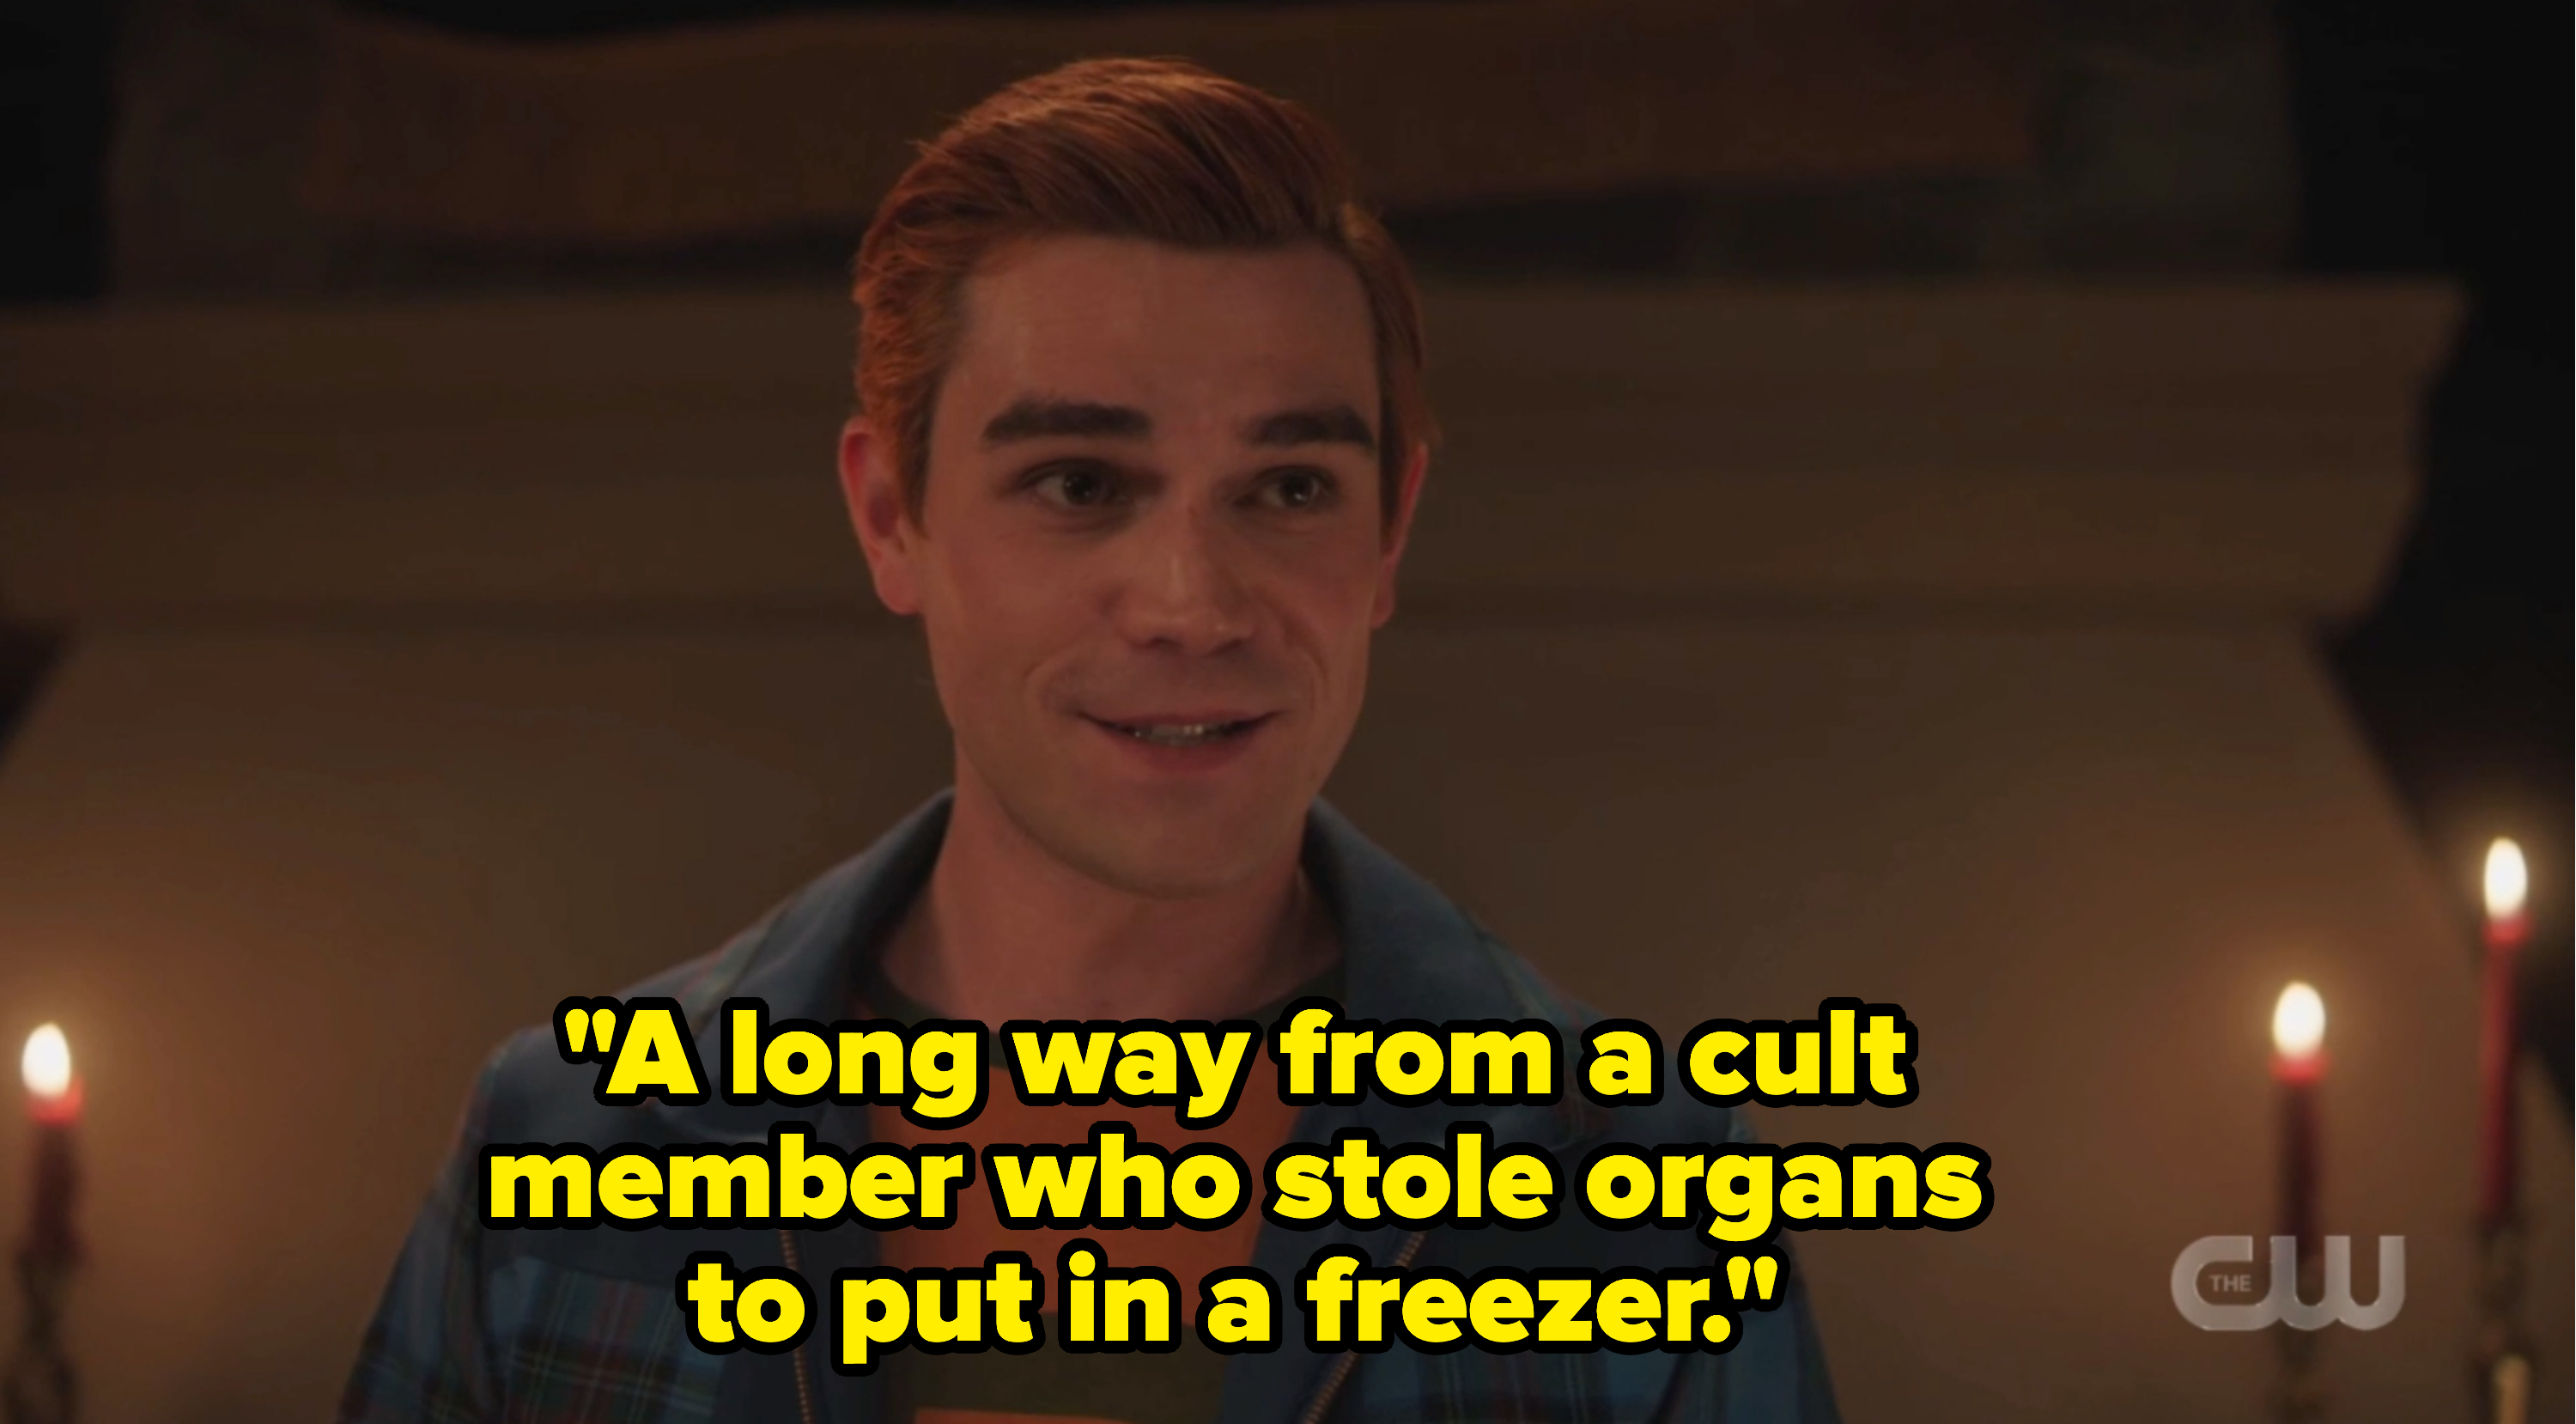 Archie saying a long way from a cult member who stole organs to put in a freezer